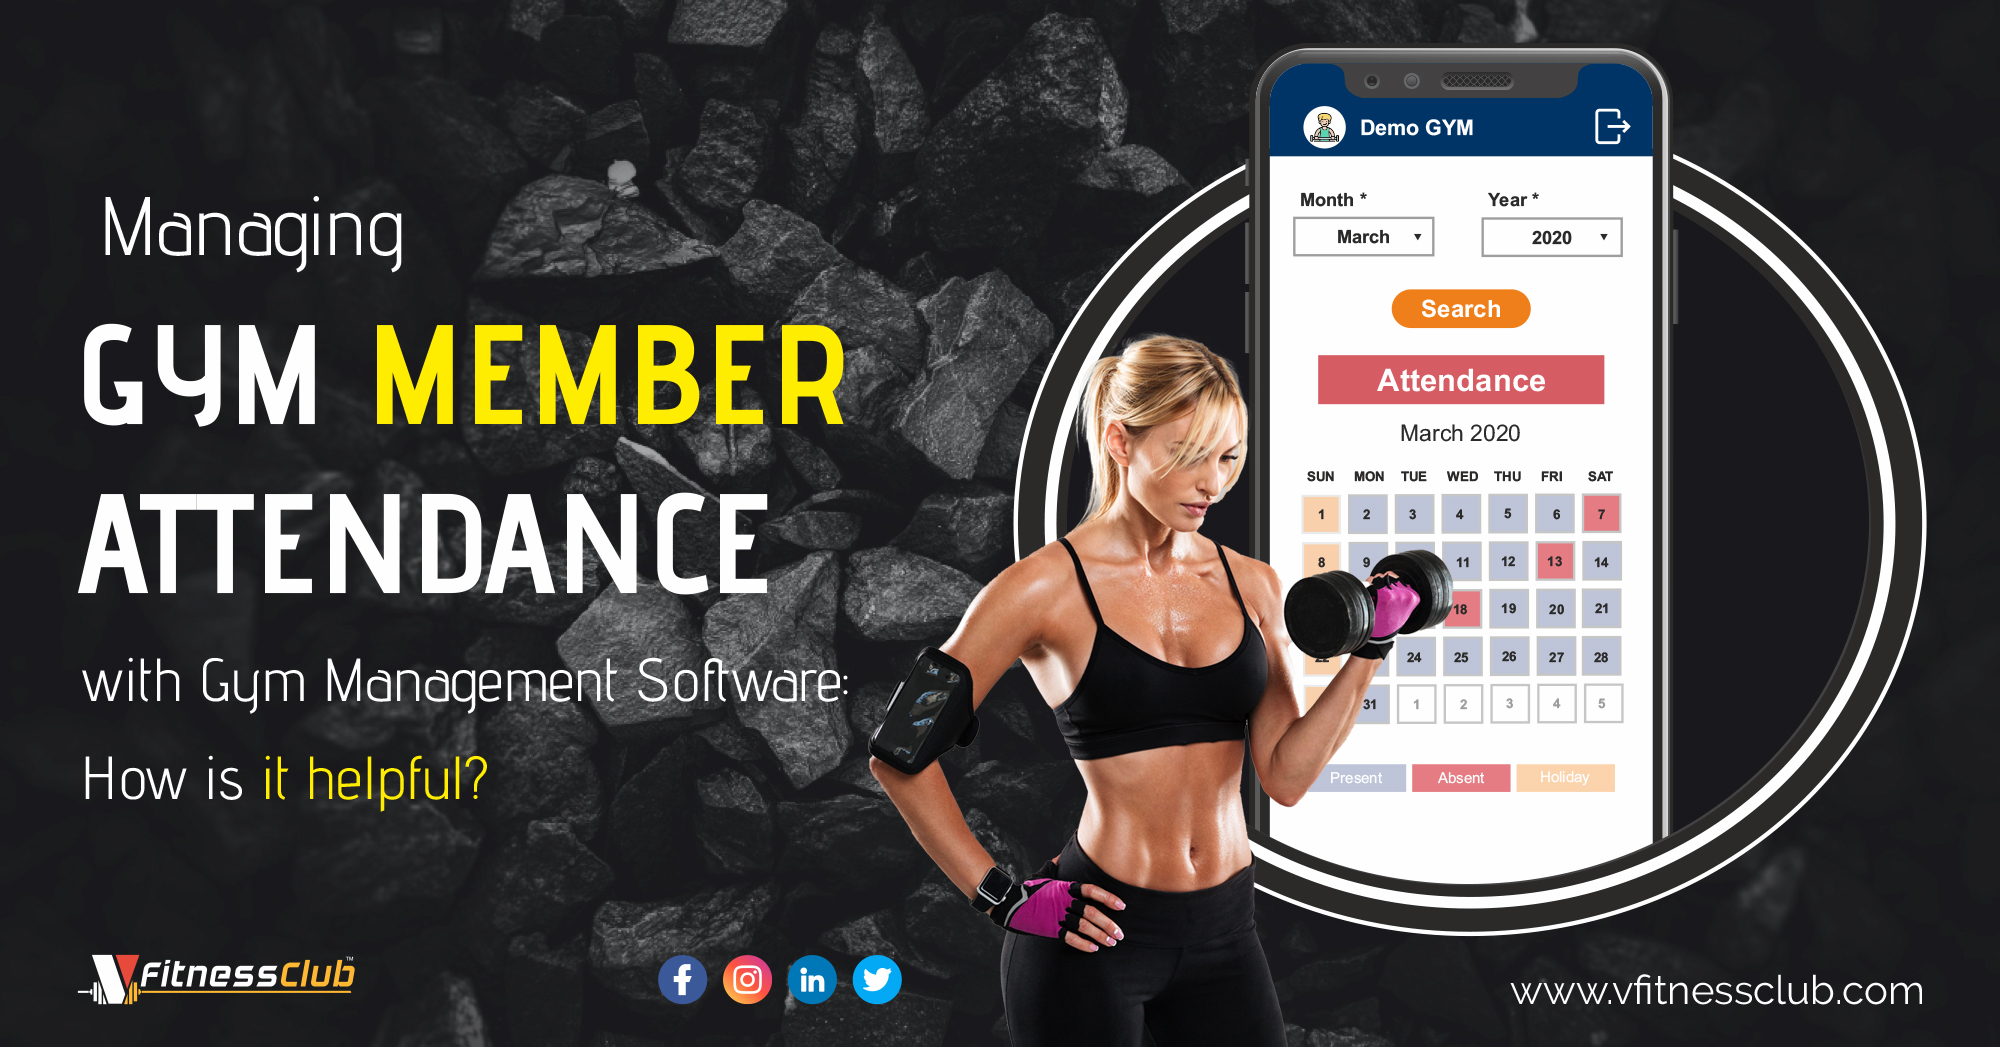 Managing Gym Member Attendance with Gym Management Software: How is it helpful